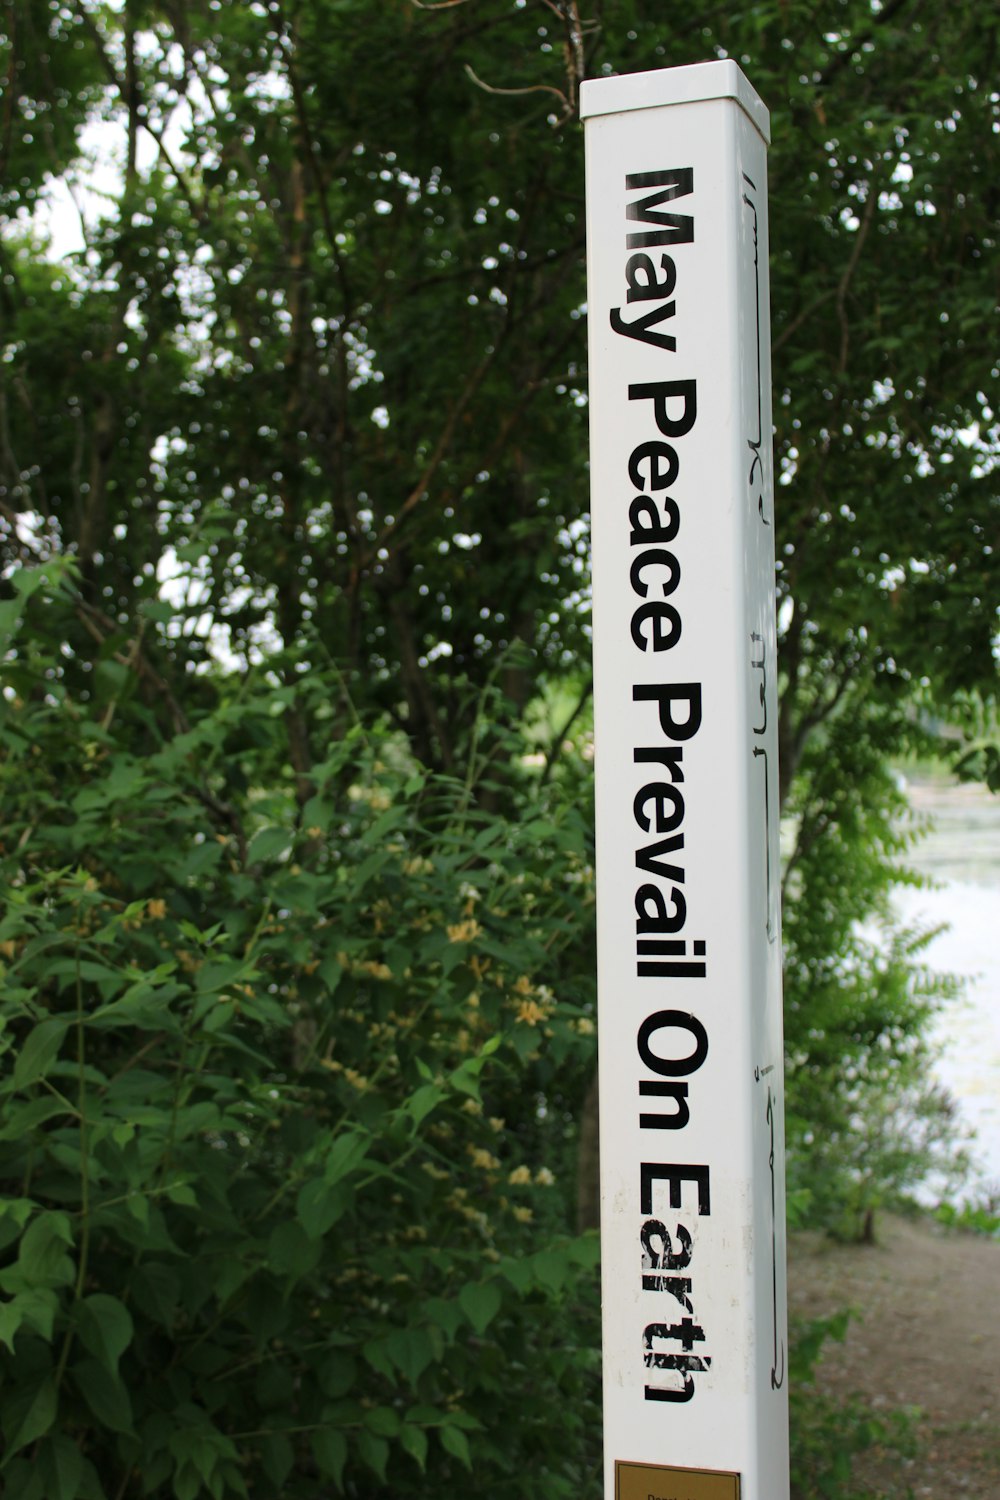 a close up of a street sign with trees in the background